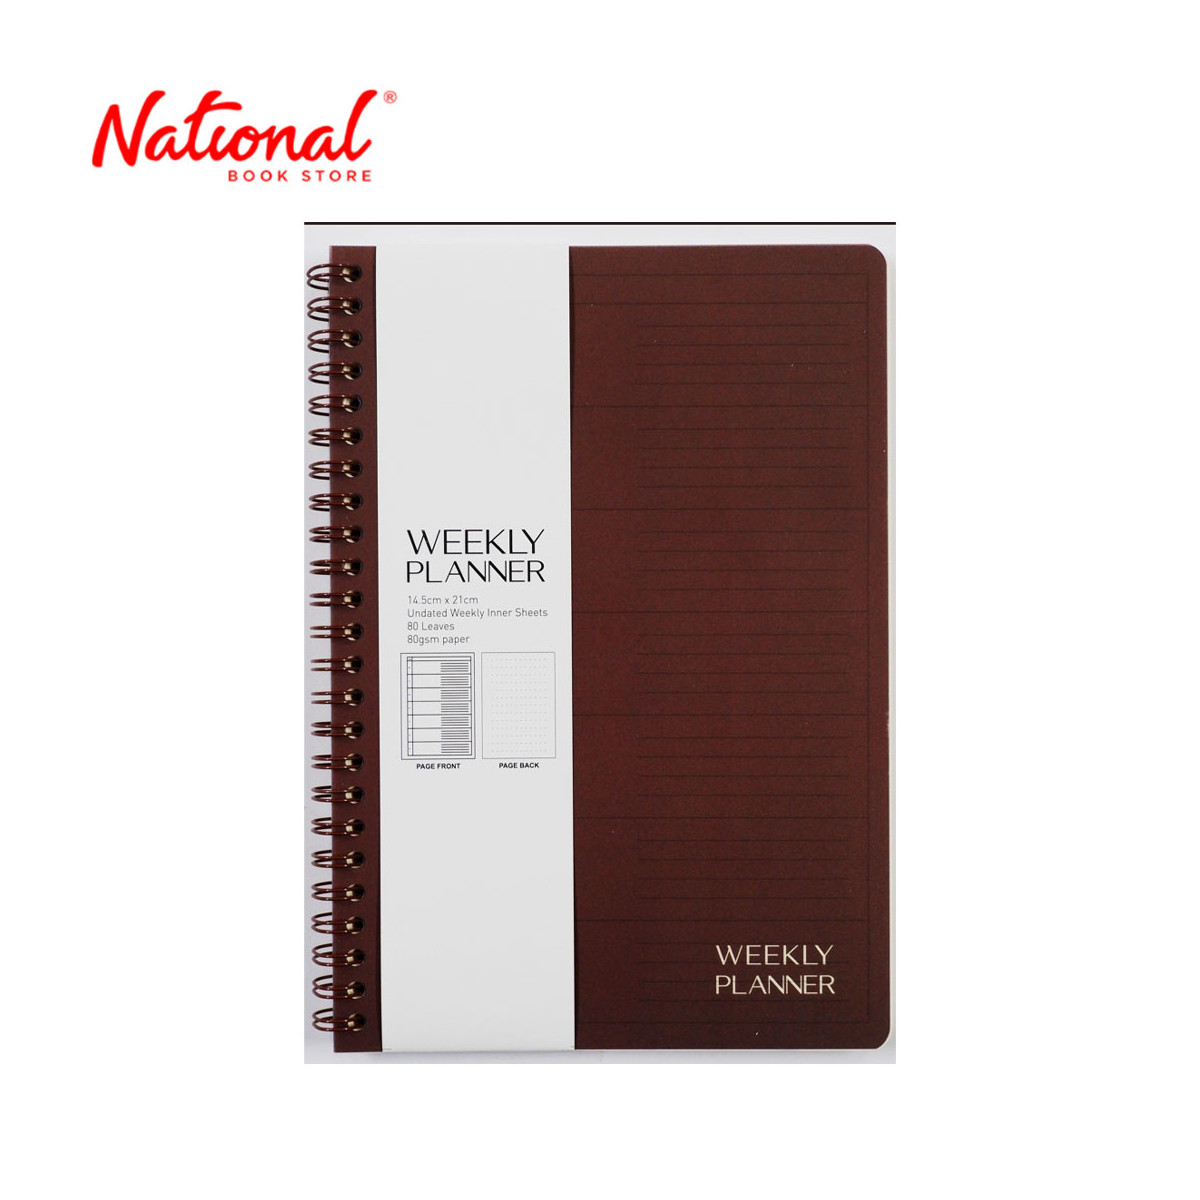 Premiere Undated Planner 14.5x 21 cm 80 Leaves 80gsm Milky Choco - Paper Supplies - Gift Items